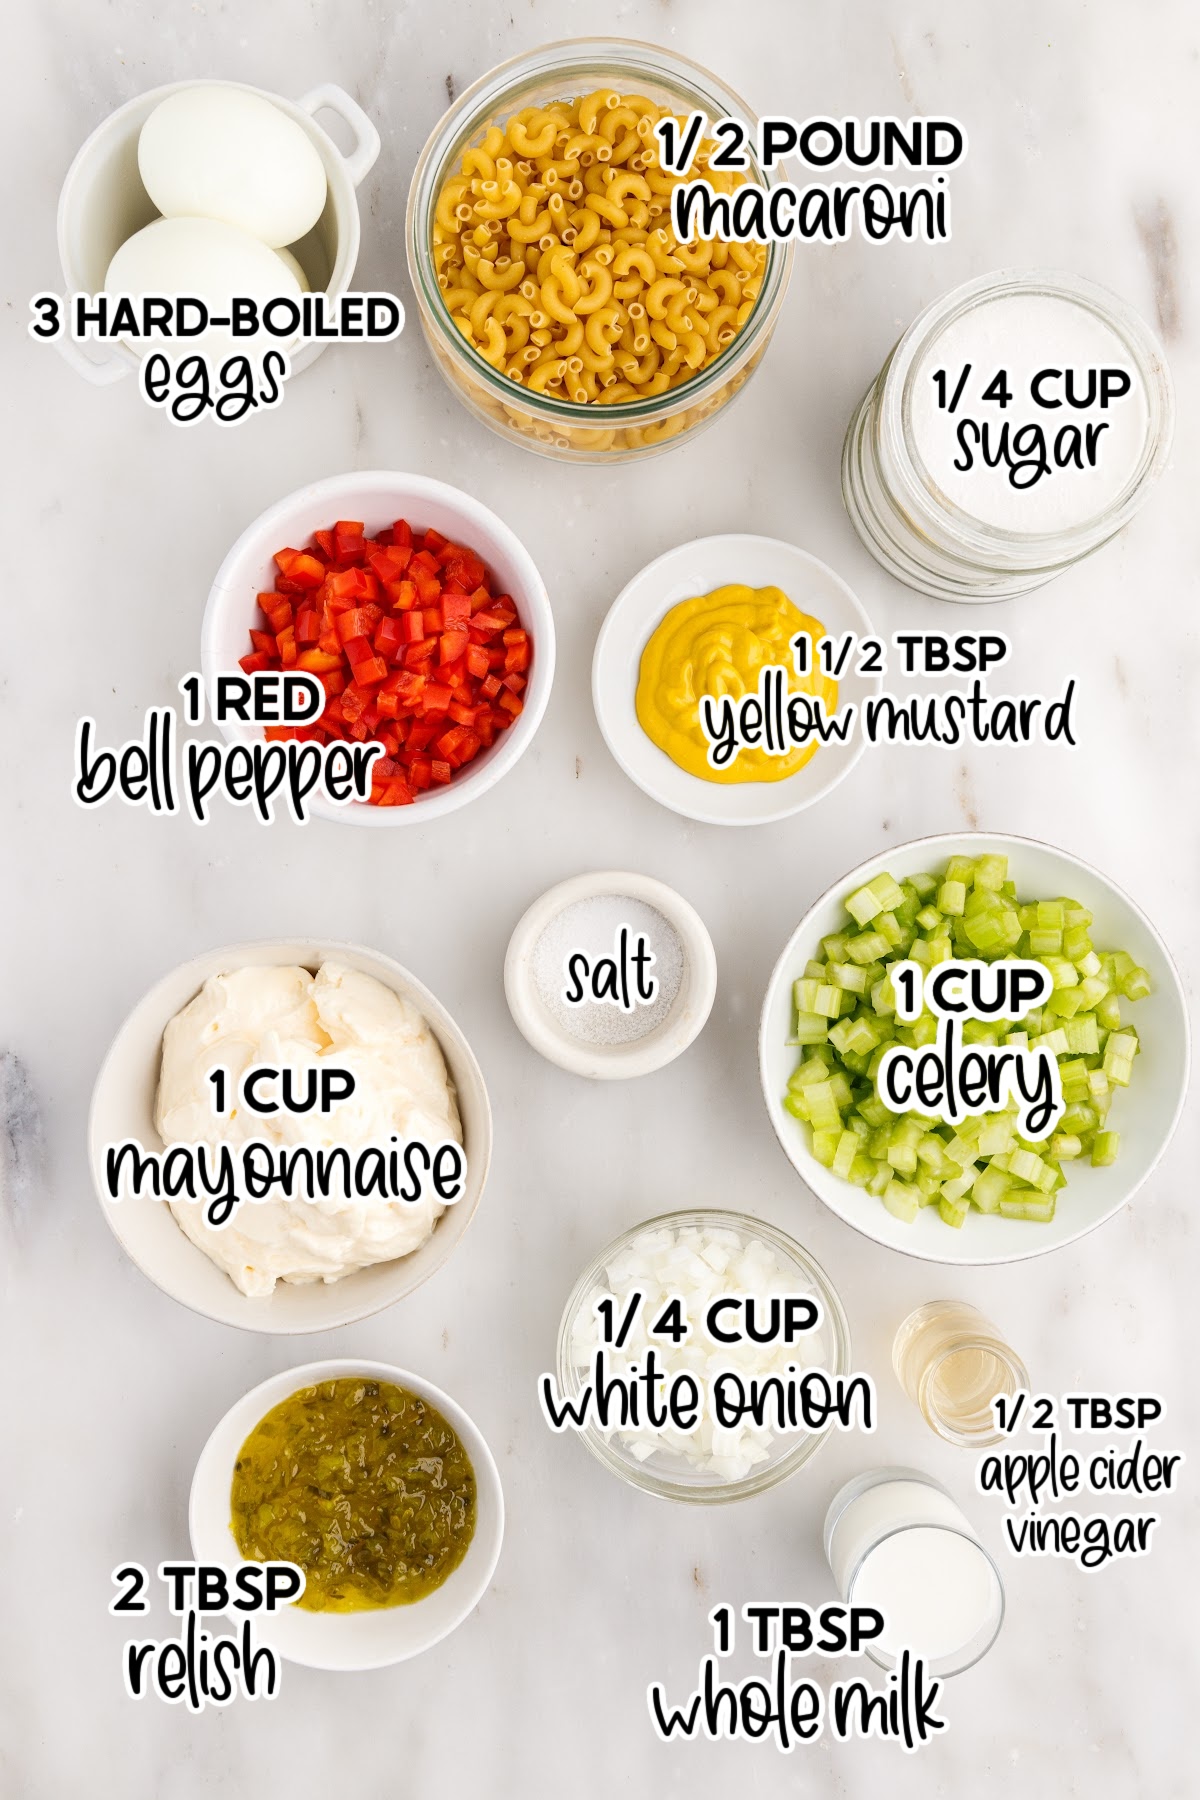 Ingredients needed to make Amish Macaroni Salad with text overlay.